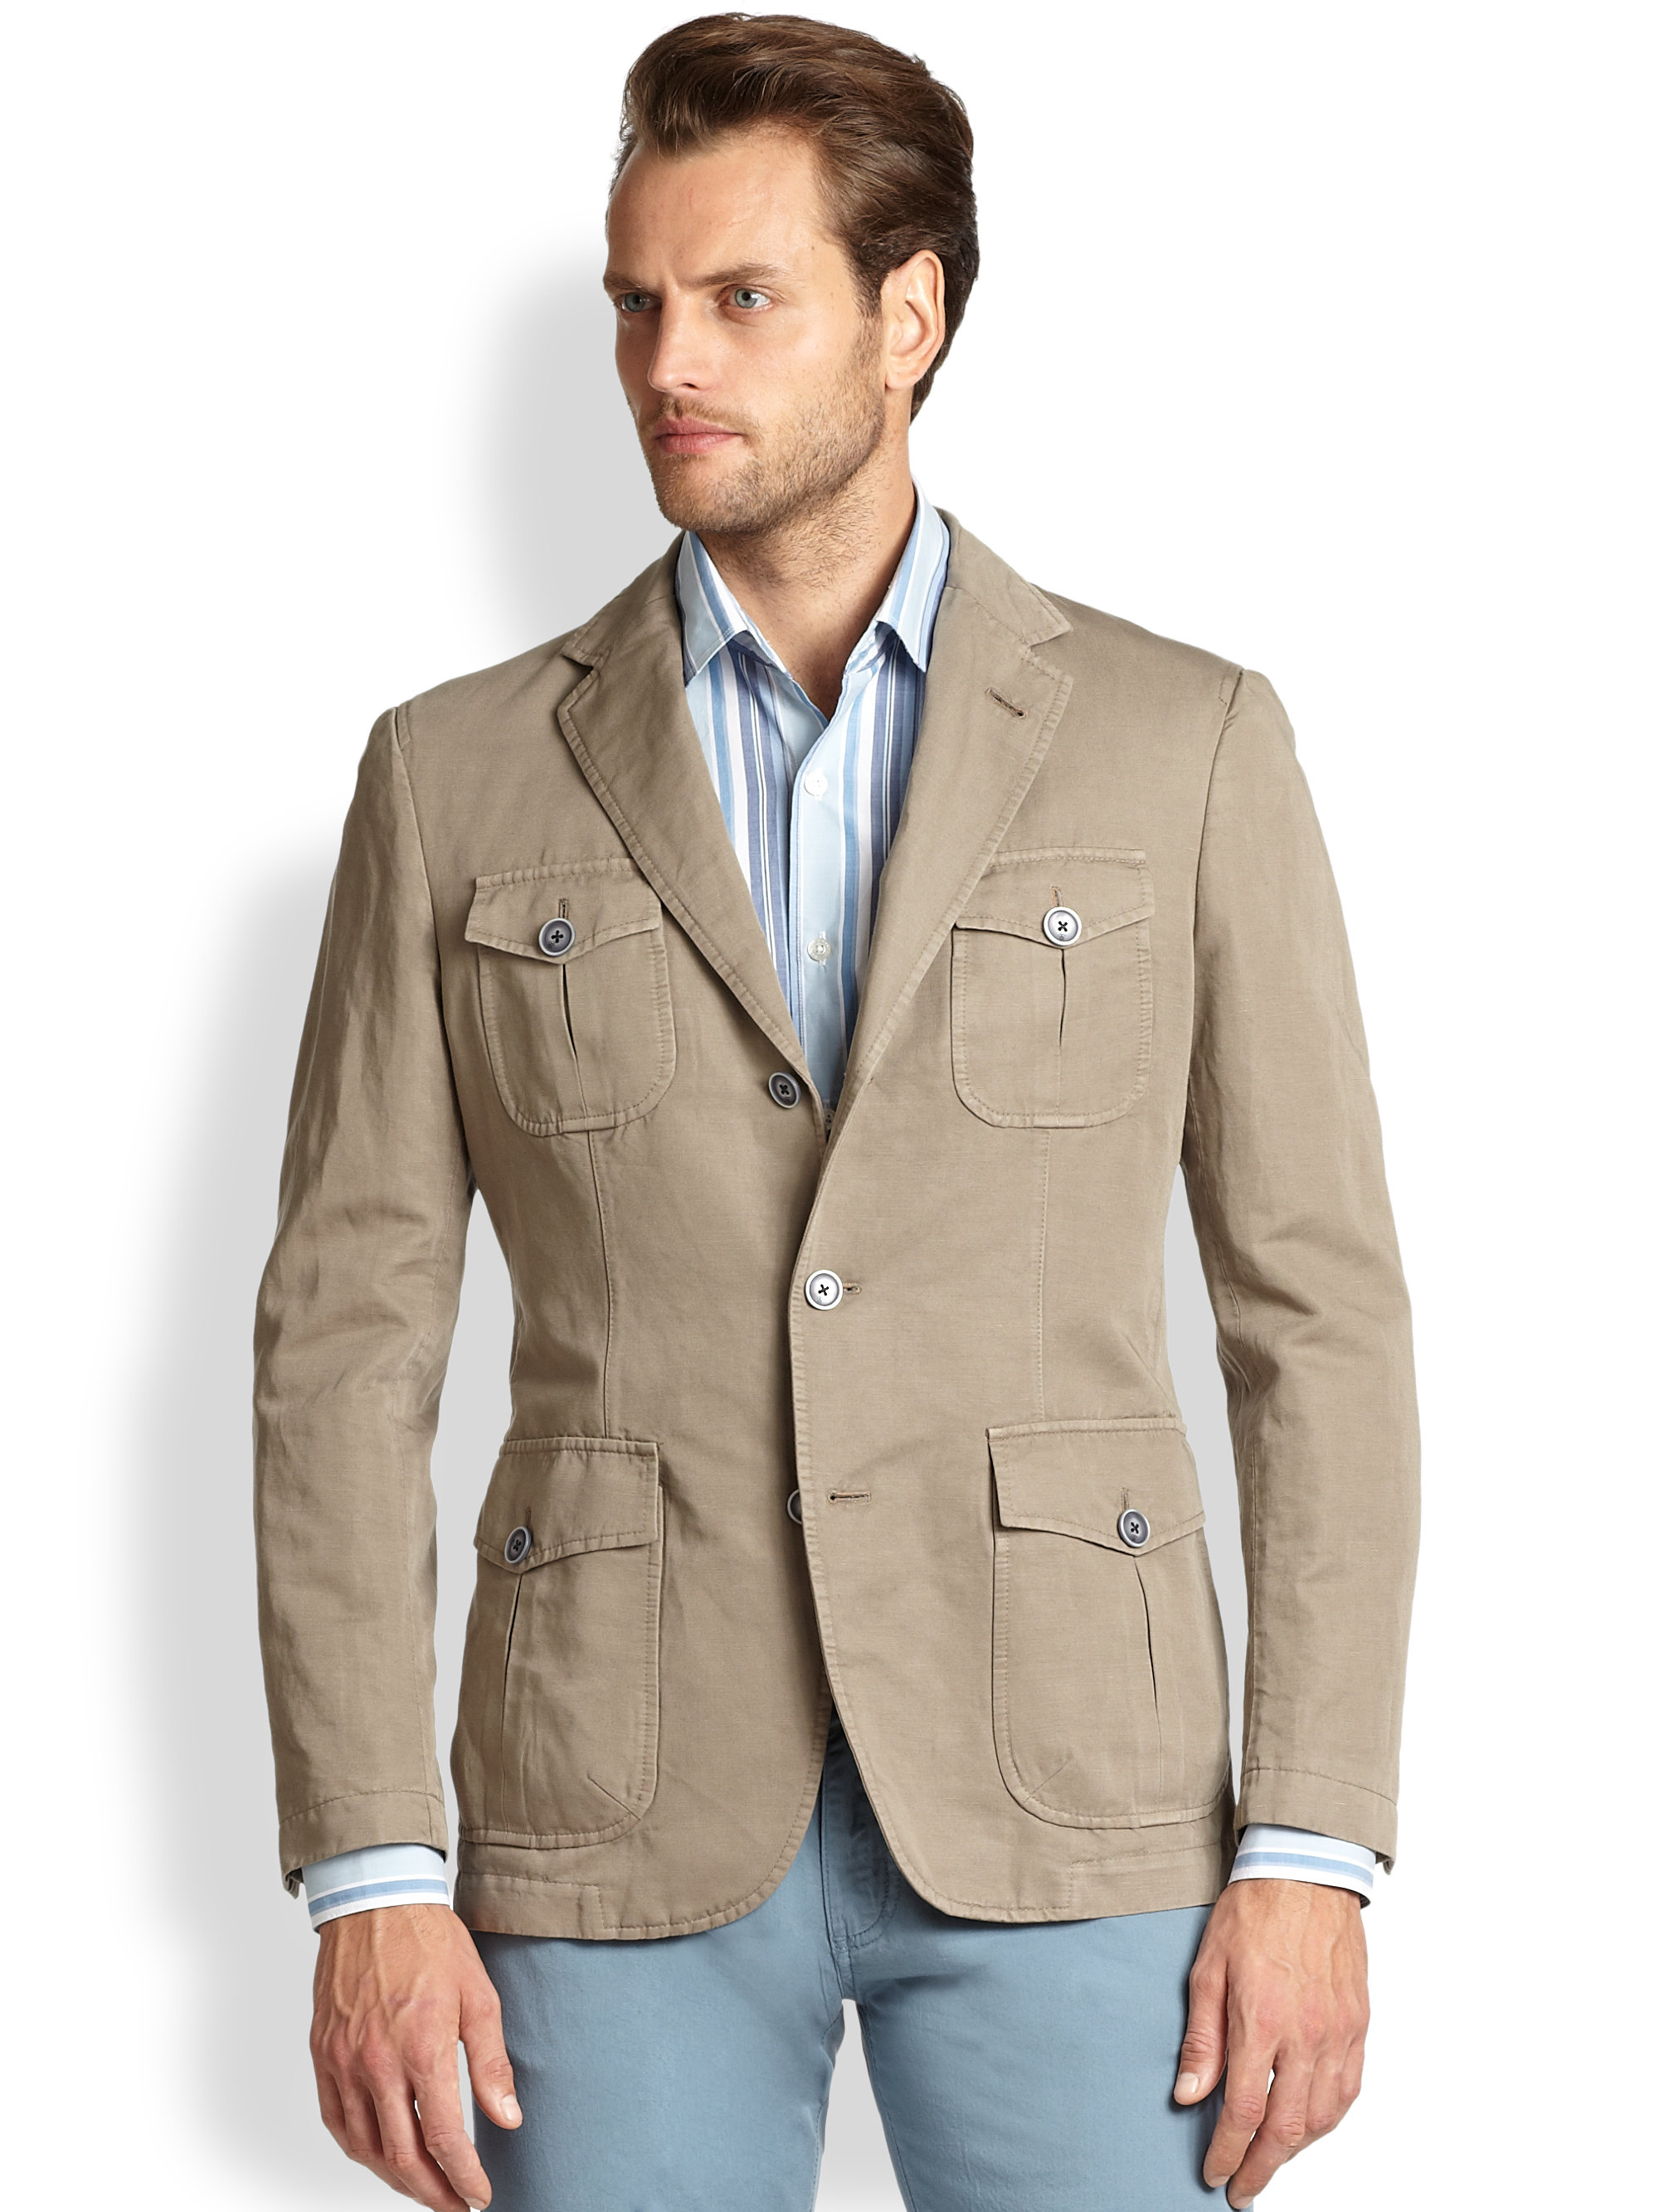 Lyst - Canali Cotton Linen Jacket in Brown for Men